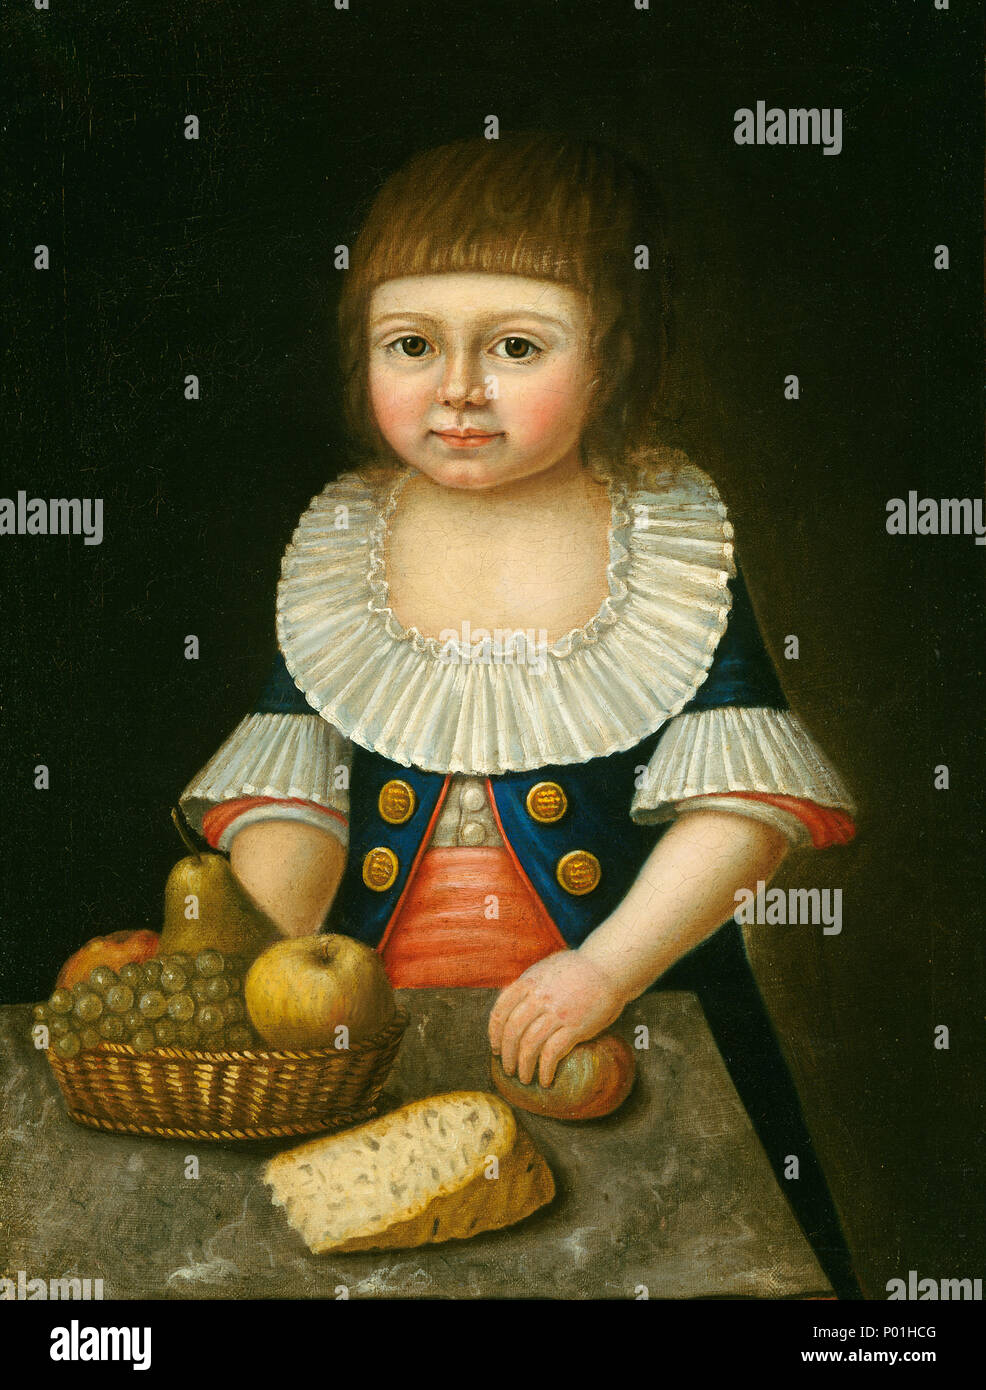 American 18th Century, Boy with a Basket of Fruit, , c. 1790, oil on canvas, Gift of Edgar William and Bernice Chrysler Garbisch 6 Boy with a Basket of Fruit G-001754-20121025 Stock Photo